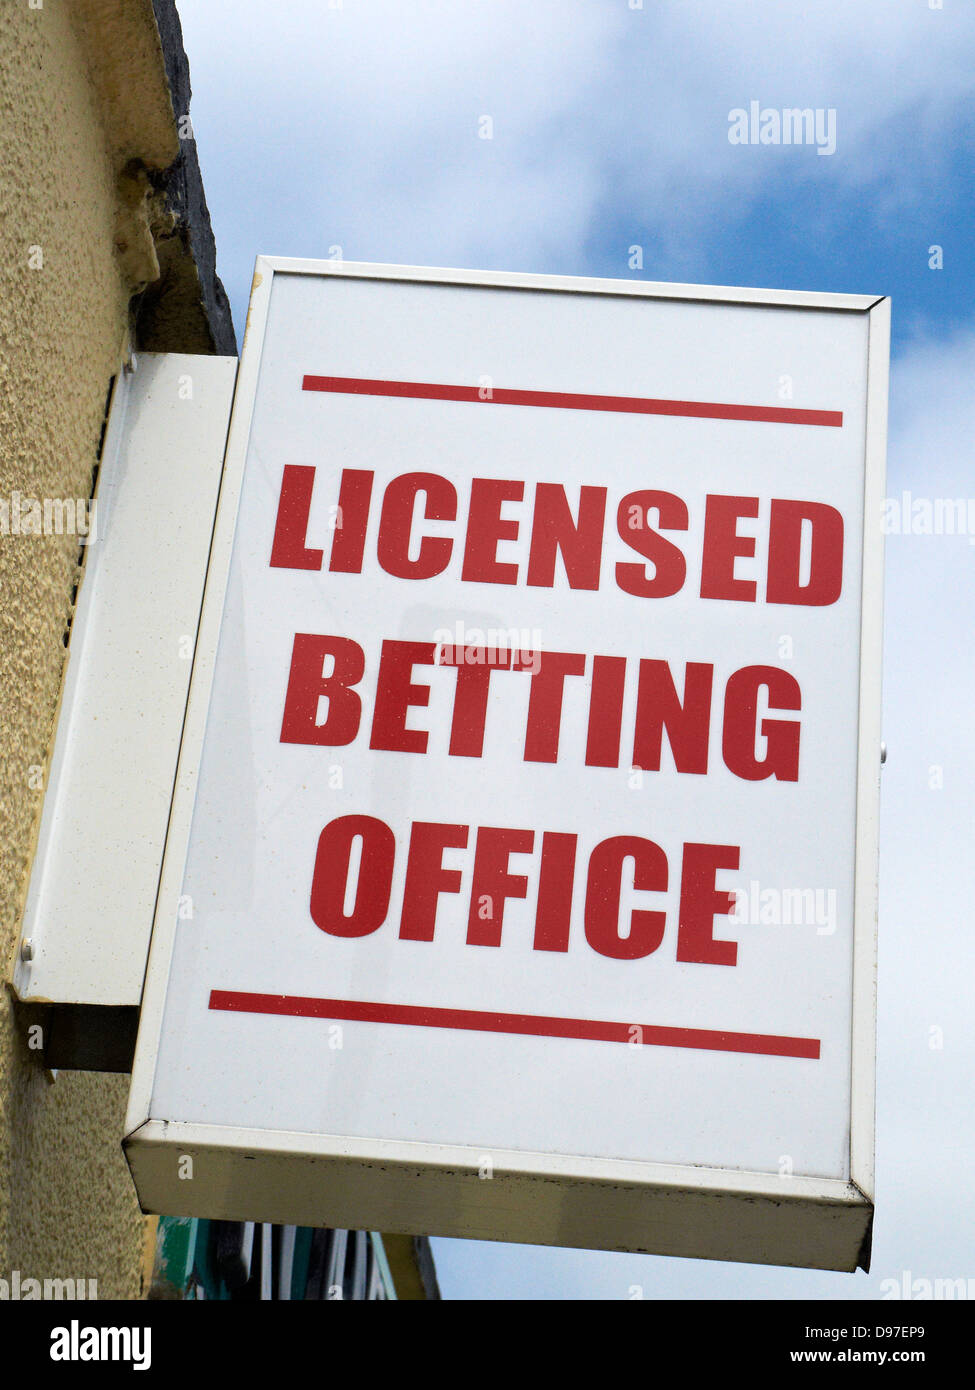 Licensed betting office sign on outside wall UK Stock Photo